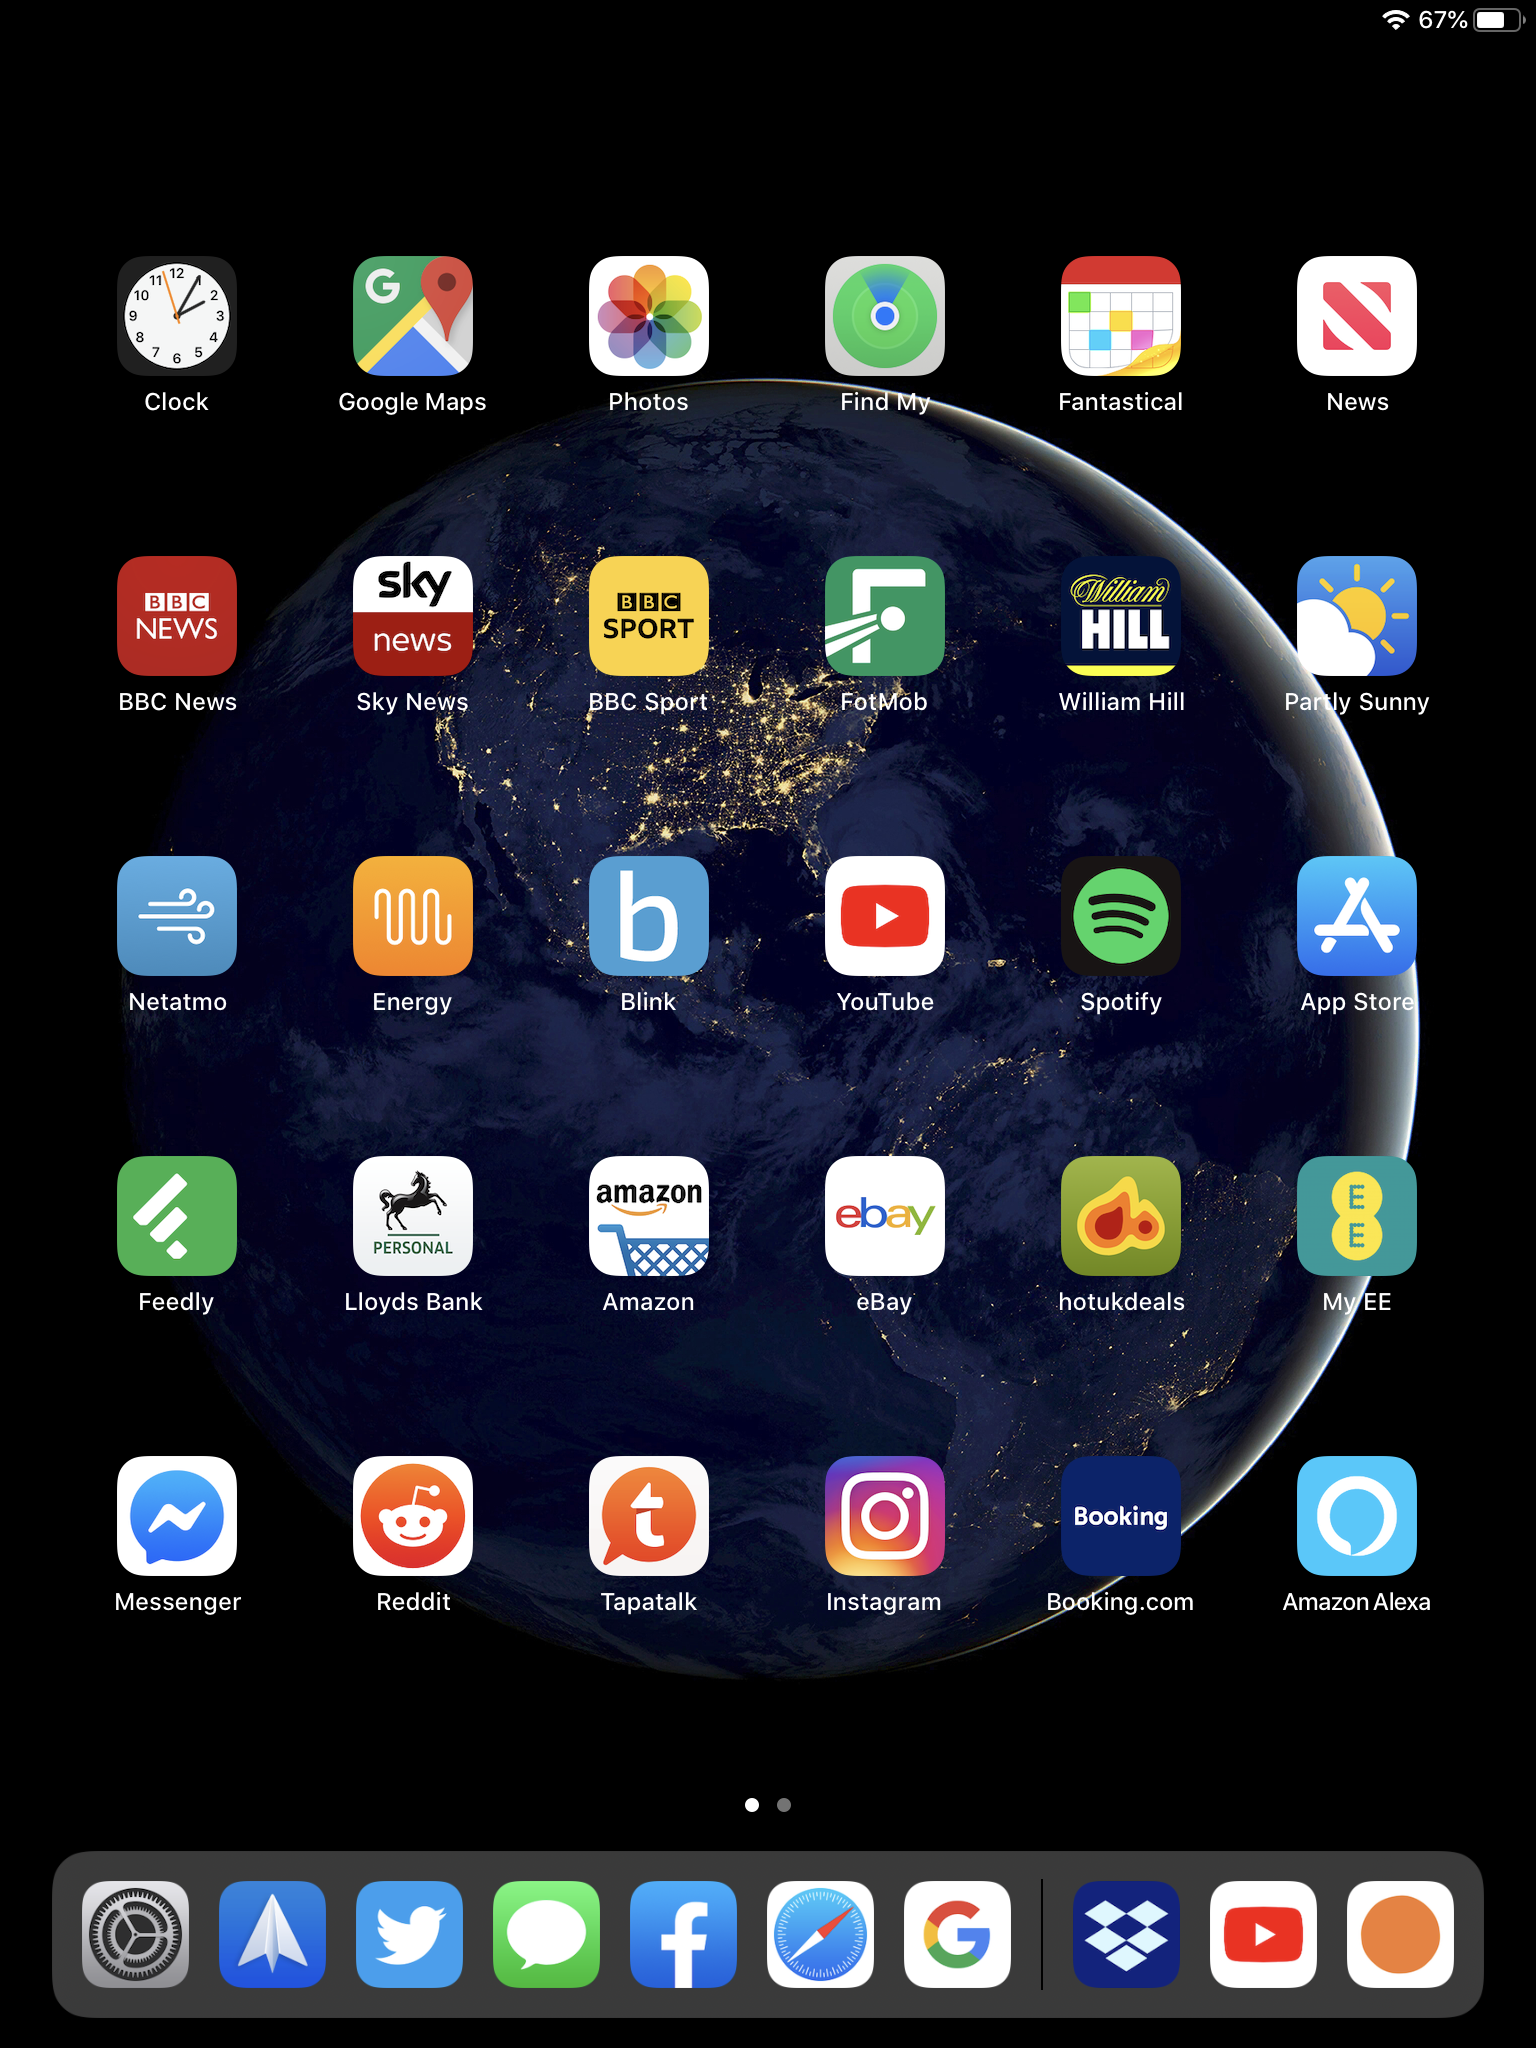 App icons are too small on iPad mini with iPadOS 